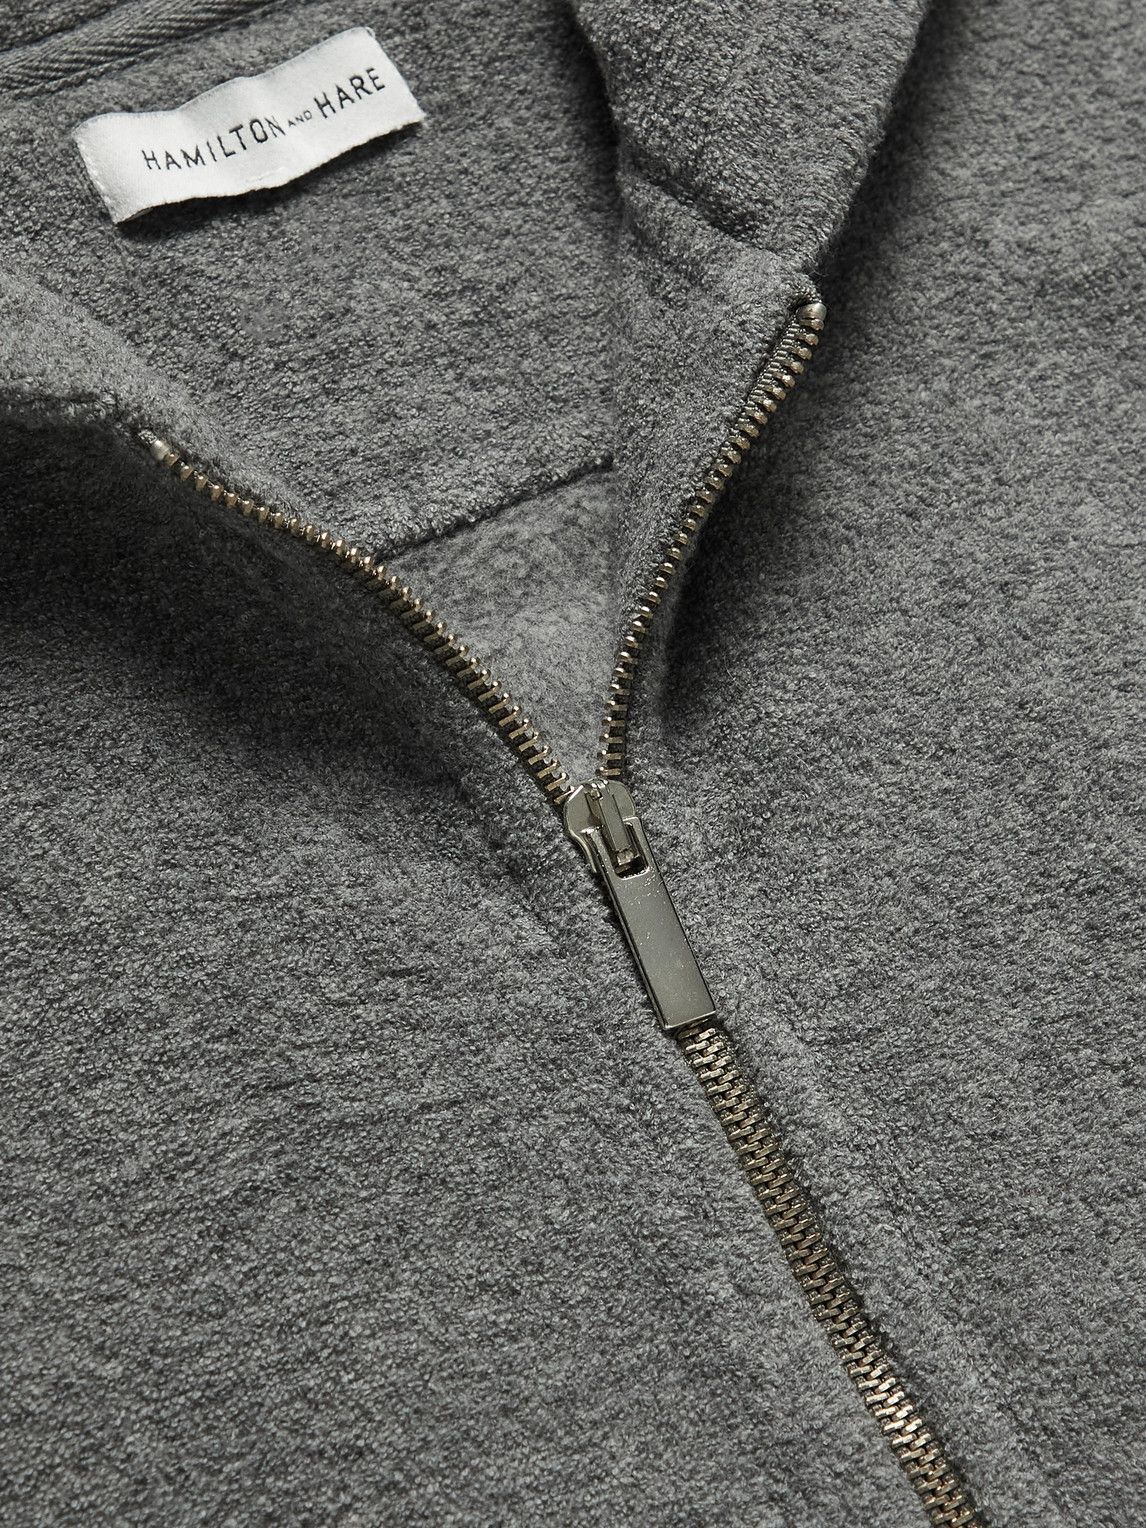 Hamilton And Hare - Cotton-Terry Zip-Up Hoodie - Gray Hamilton and Hare